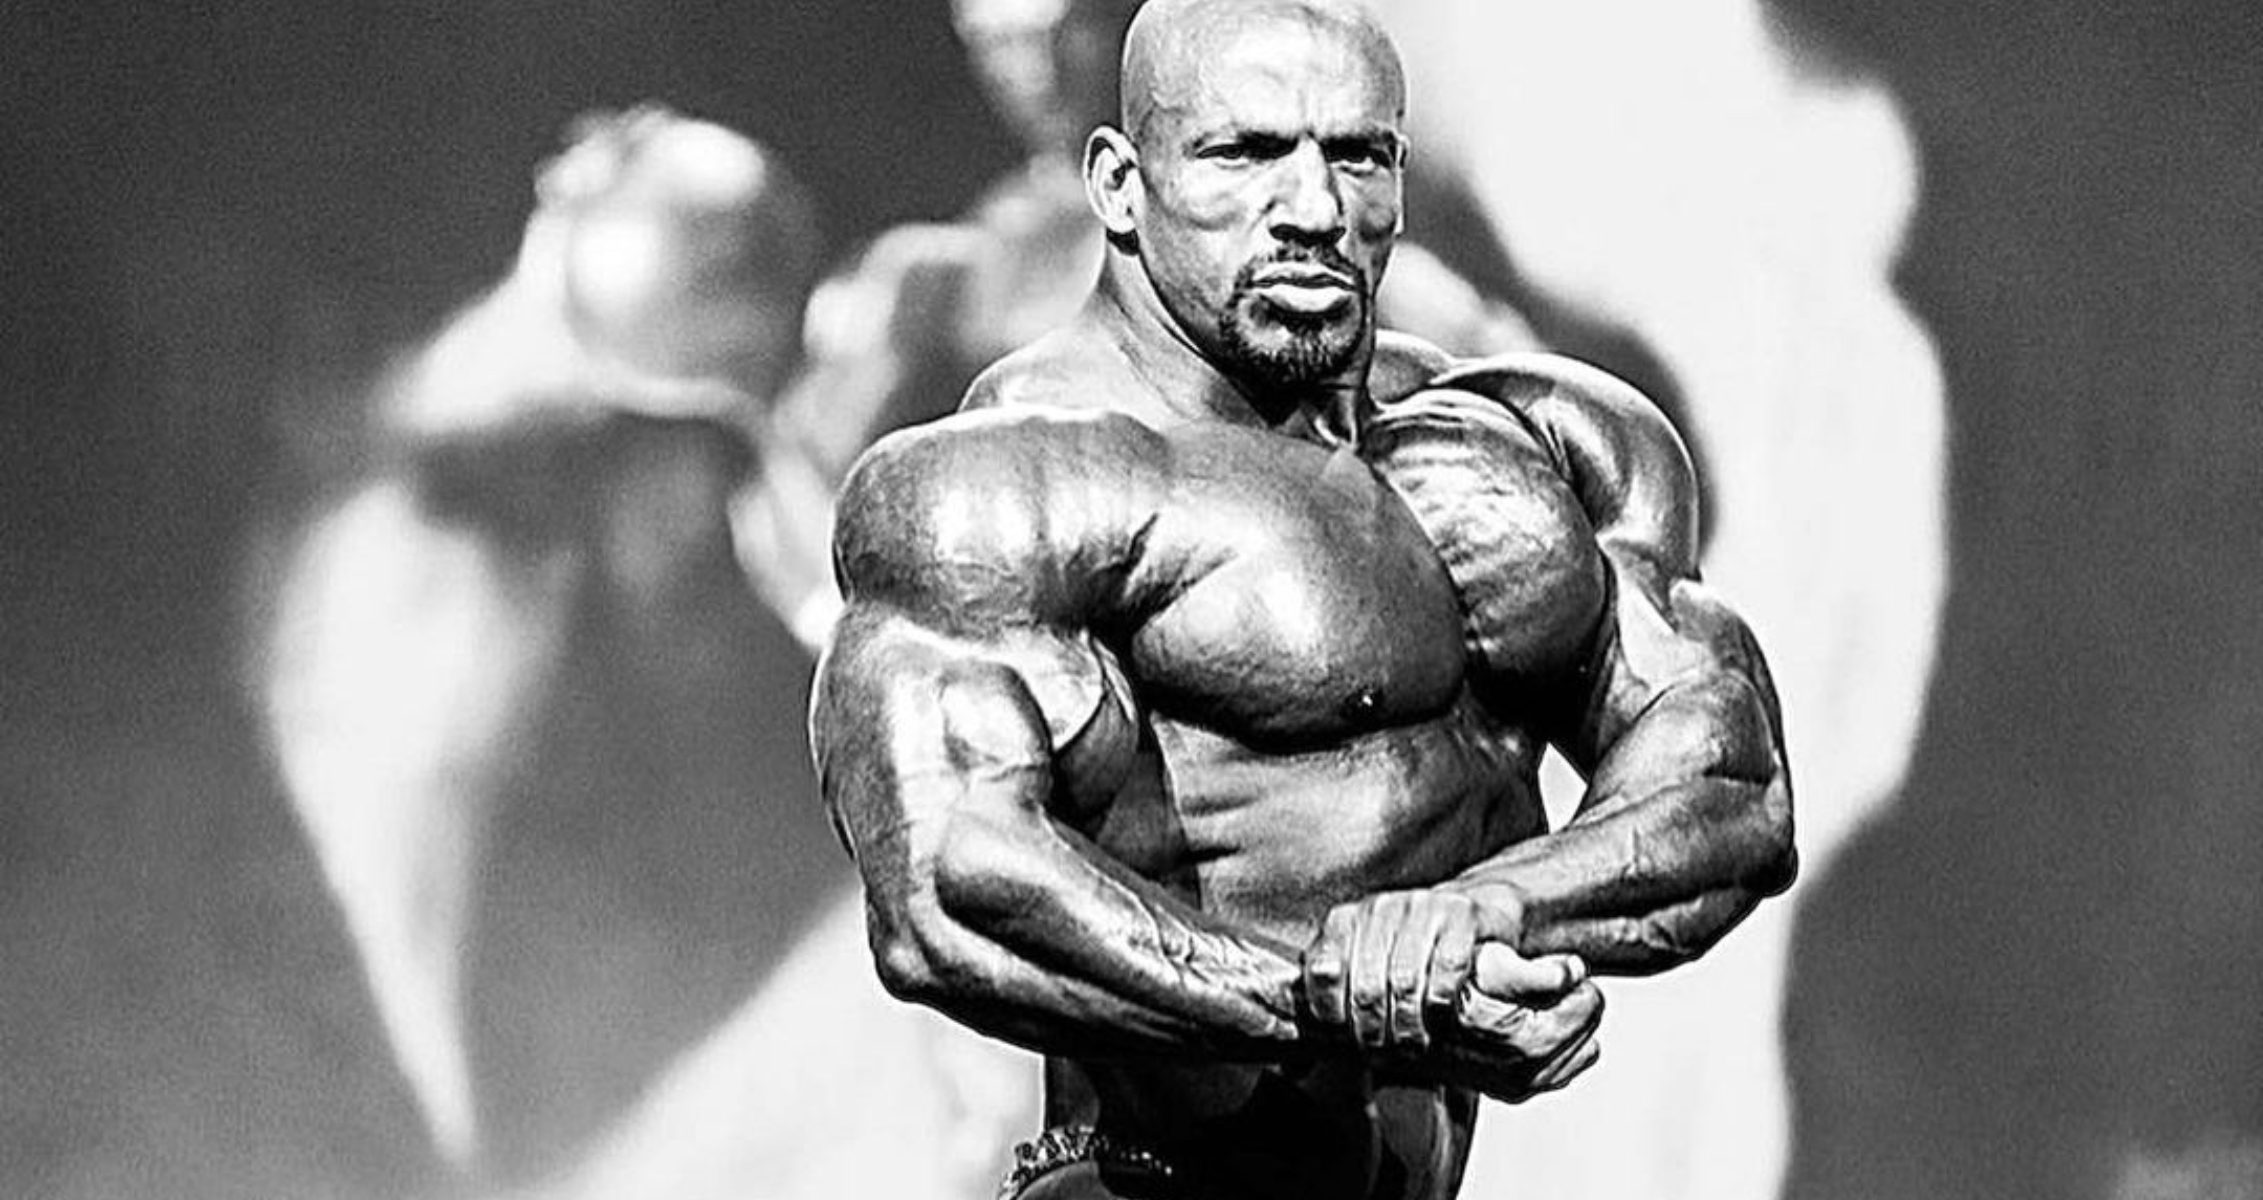 Big Ramy Q&A: Nutrition Tips With Mr. Olympia Champ